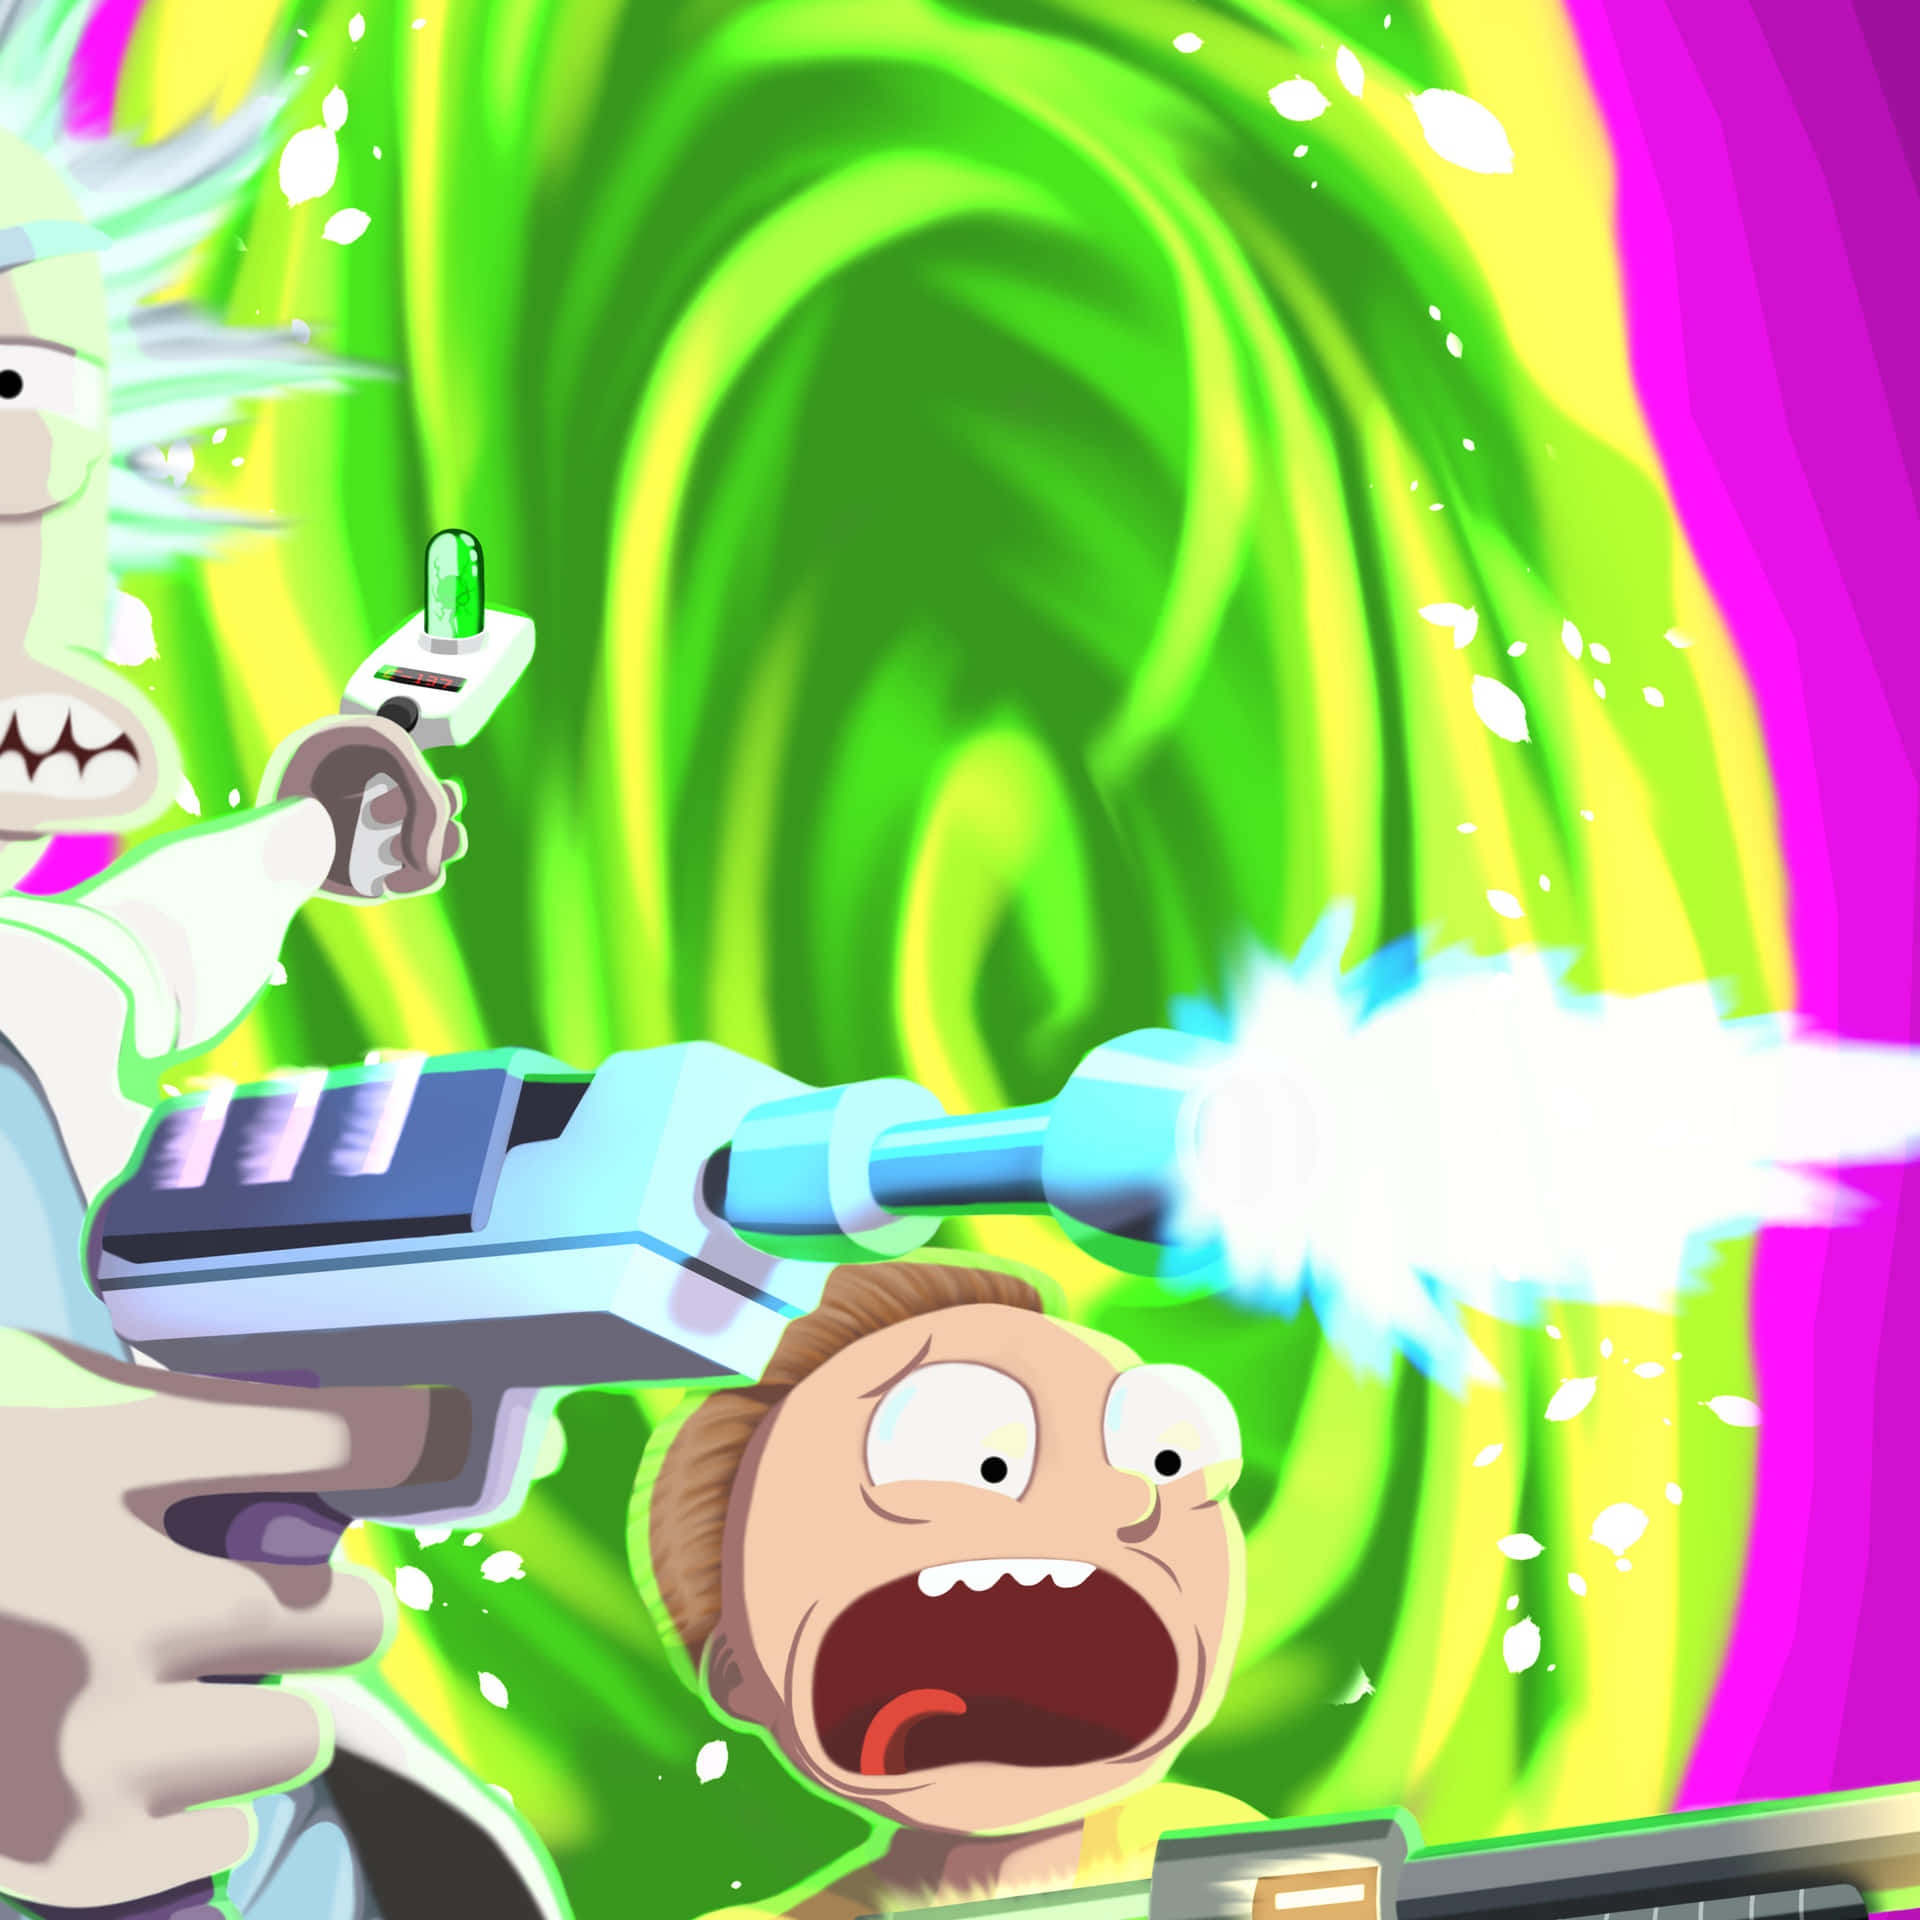 Explore alternate universes with Rick and Morty Wallpaper